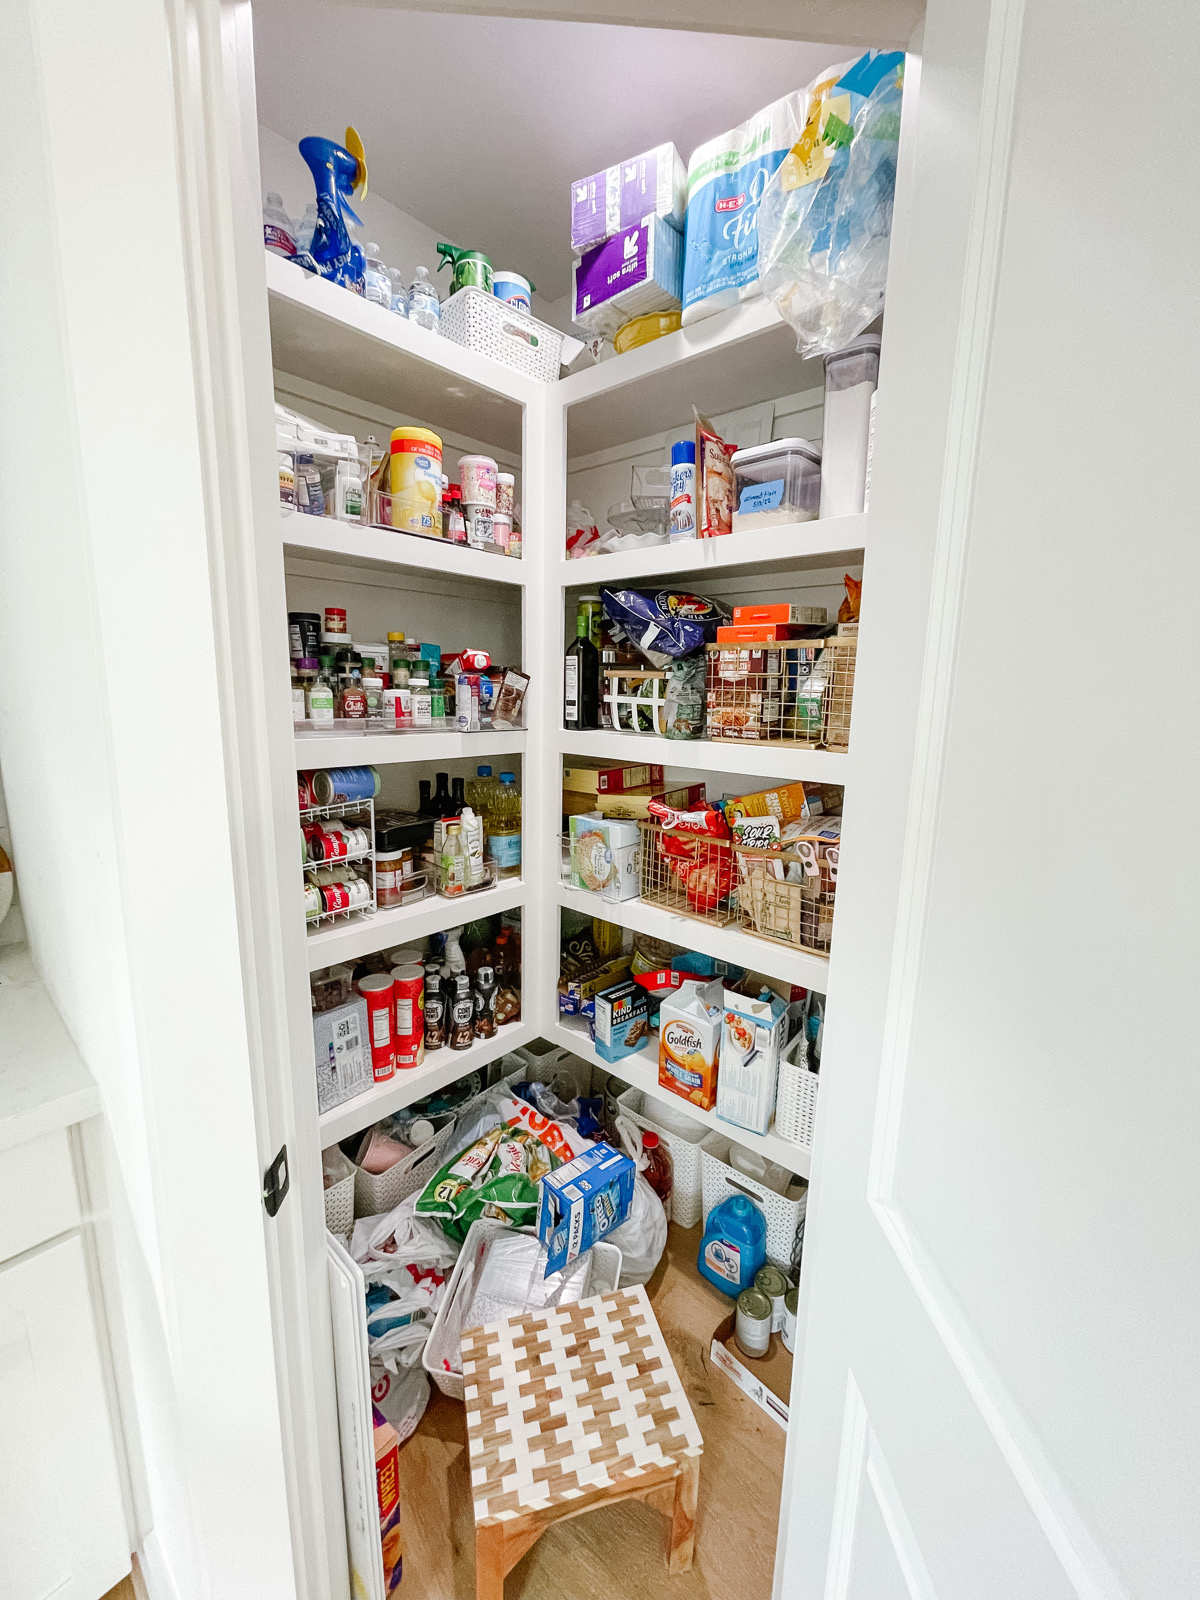 Our Pantry Makeover with The Organized Chaos Co. - Veronika's Blushing